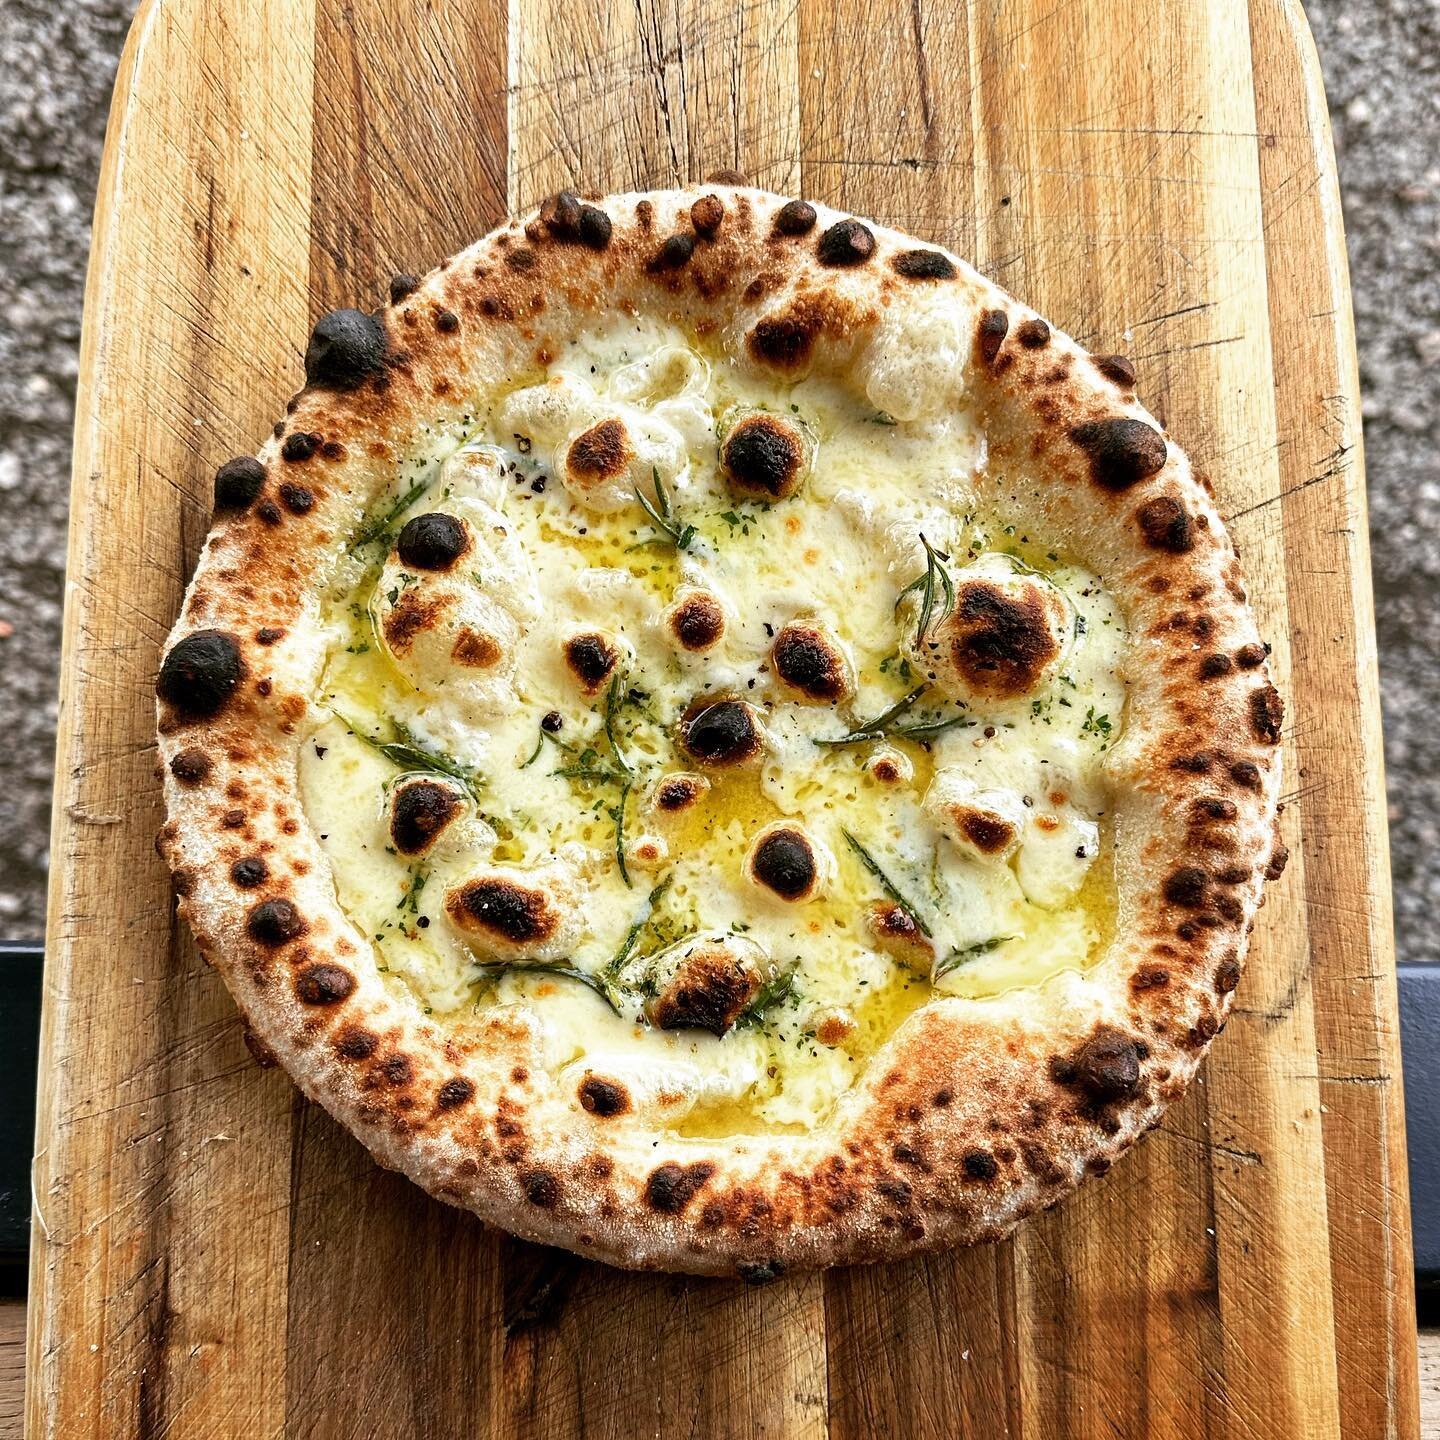 We&rsquo;re a bit obsessed with this filthy little number. A new addition to our growing menu. 

Homemade Garlic &amp; Herb butter, Mozzarella, Rosemary and Maldon salt. This one slaps 🤌🏼

#pizza #pizzalover #pizzatime #pizzalovers #pizzeria #pizza